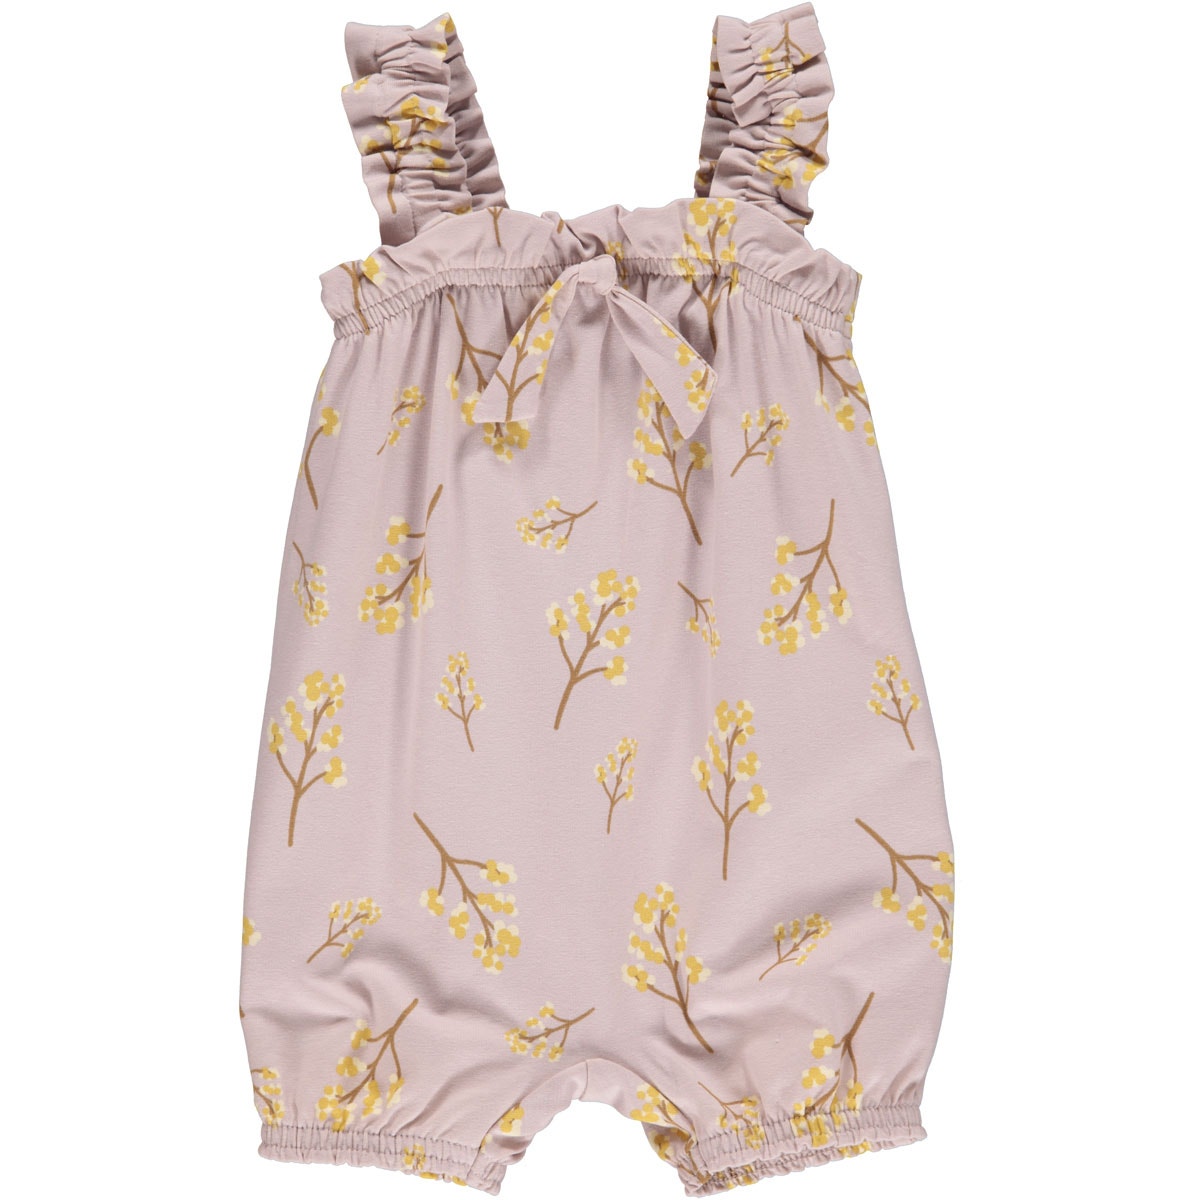 MAMA.LICIOUS Baby one-piece suit -Rose Moon - 1583043500